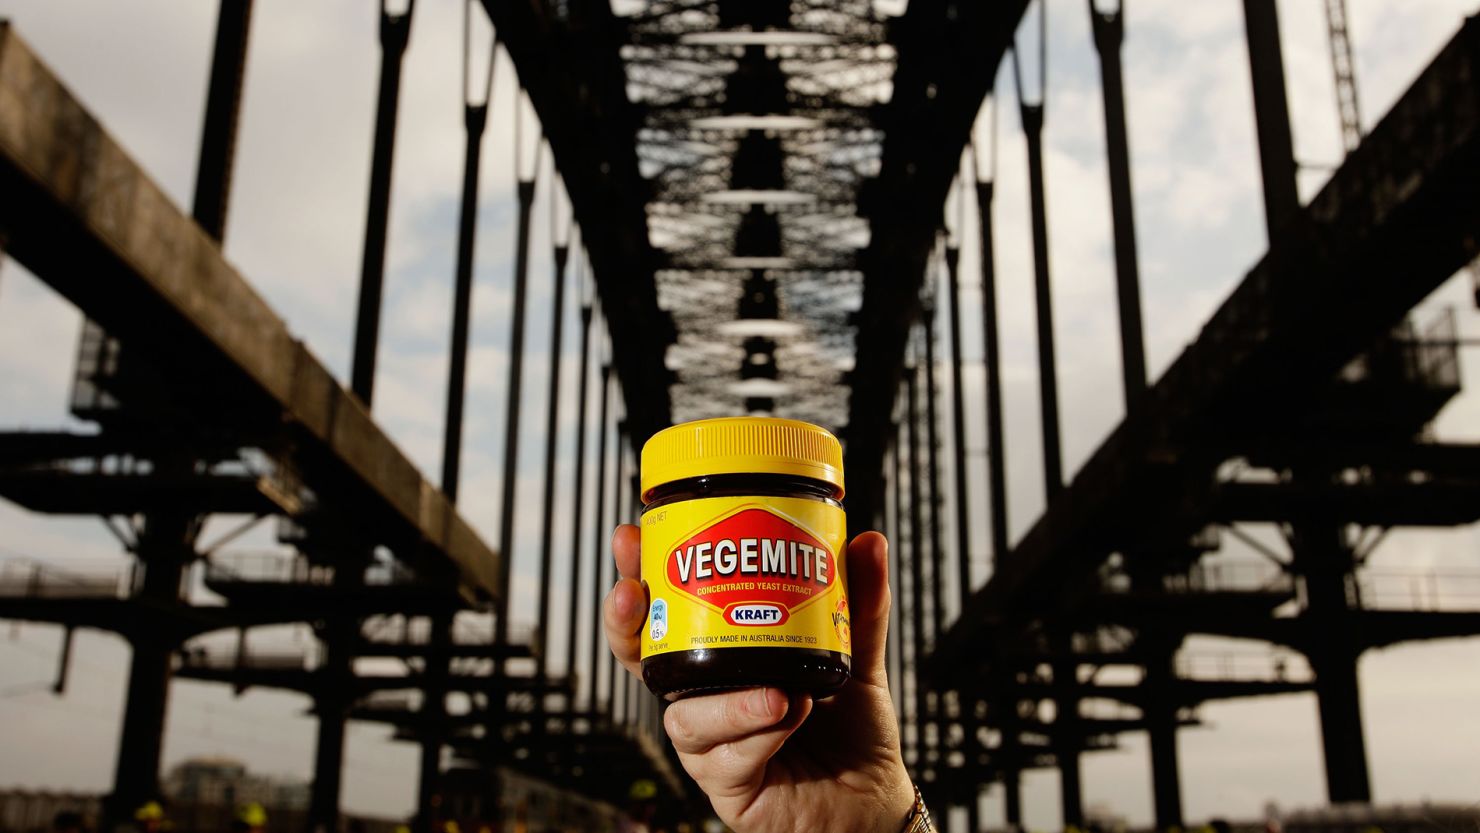 Vegemite: The iconic Australian sandwich spread. It's made from brewers' yeast so you know it's good.